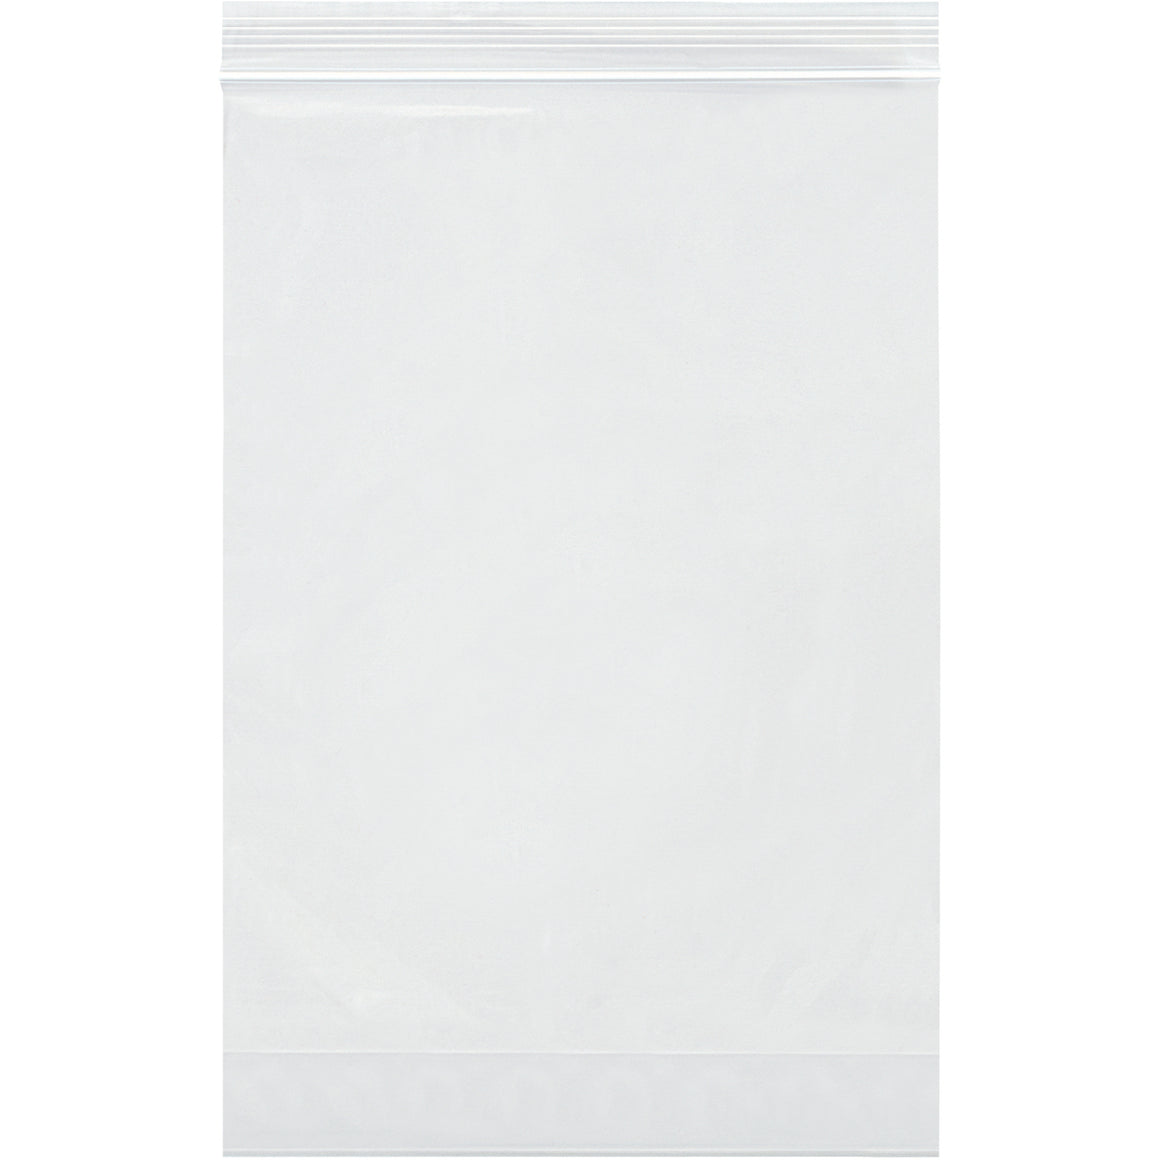 Reclosable Bags: Small and Large Resealable Bags - PackagingSupplies.com